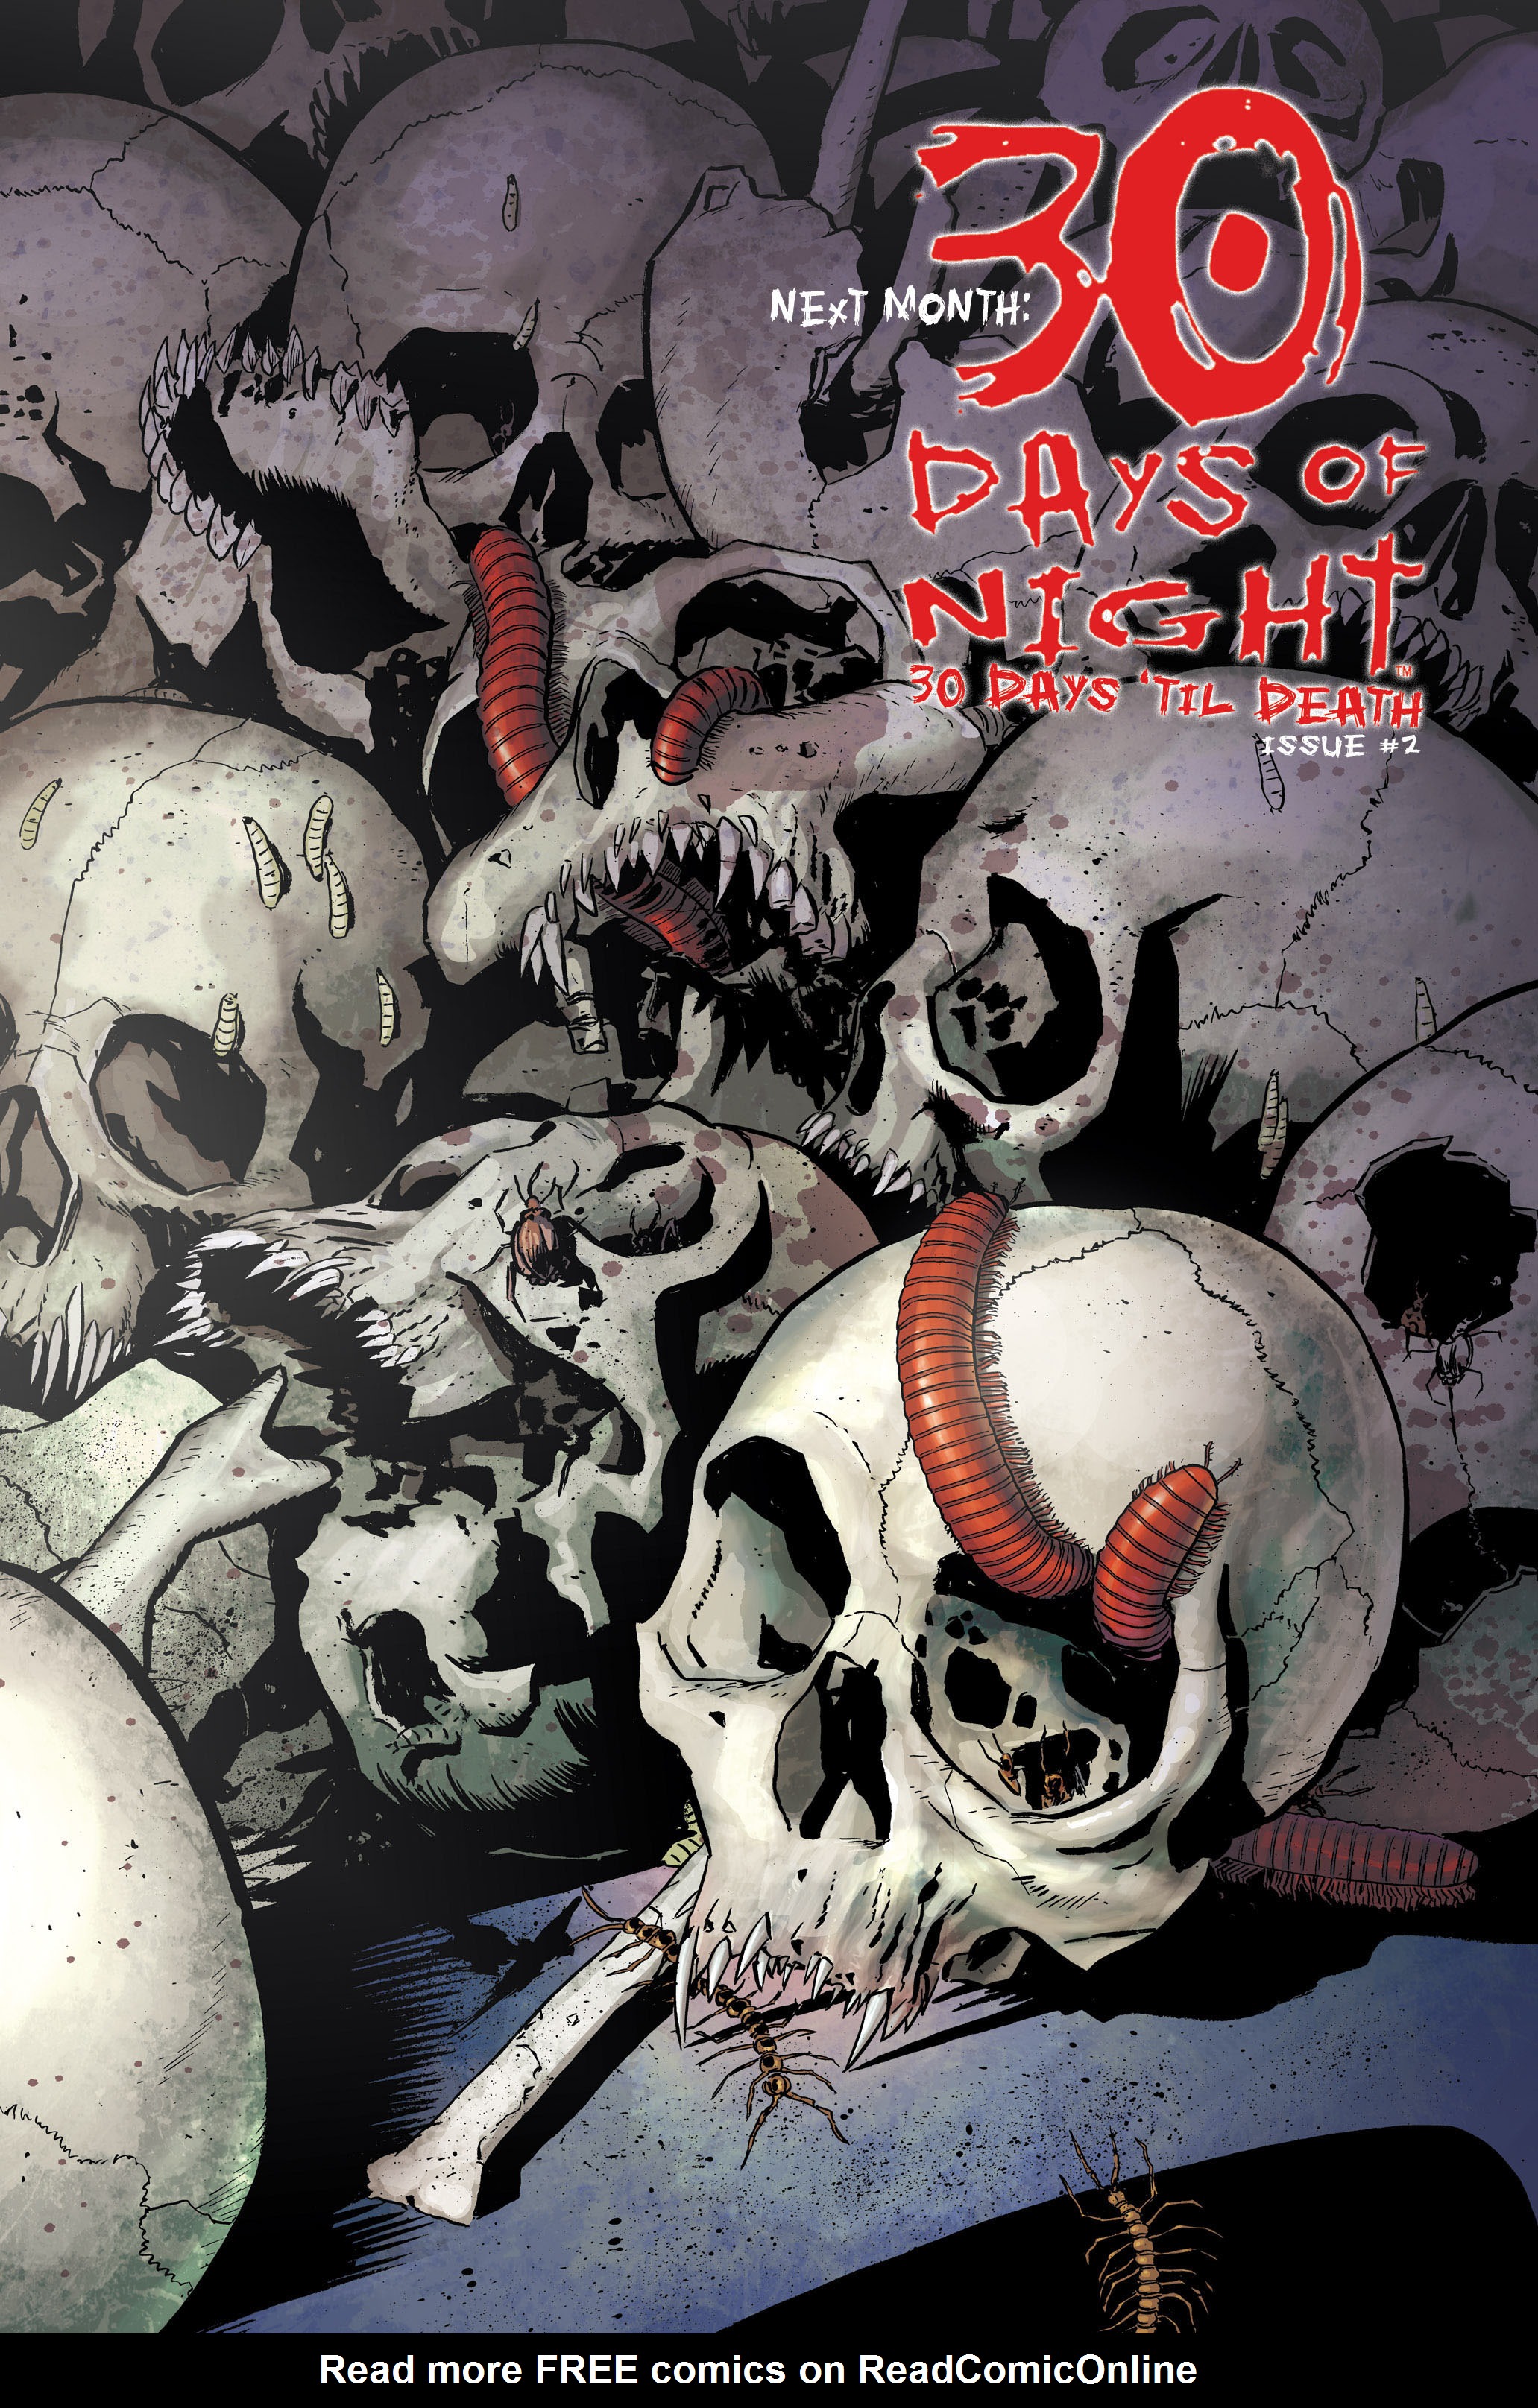 Read online 30 Days of Night: 30 Days 'til Death comic -  Issue #1 - 25